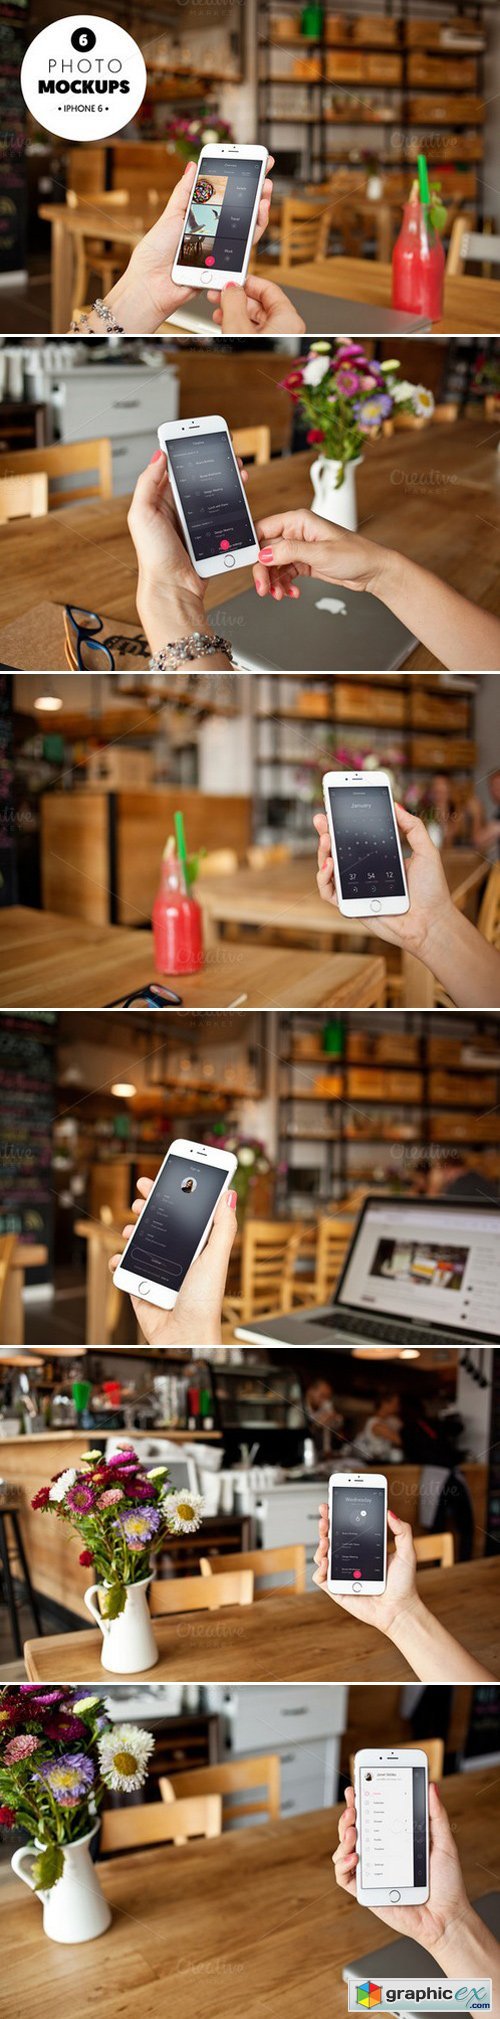 Iphone 6 in the cafe-6 photo mockups